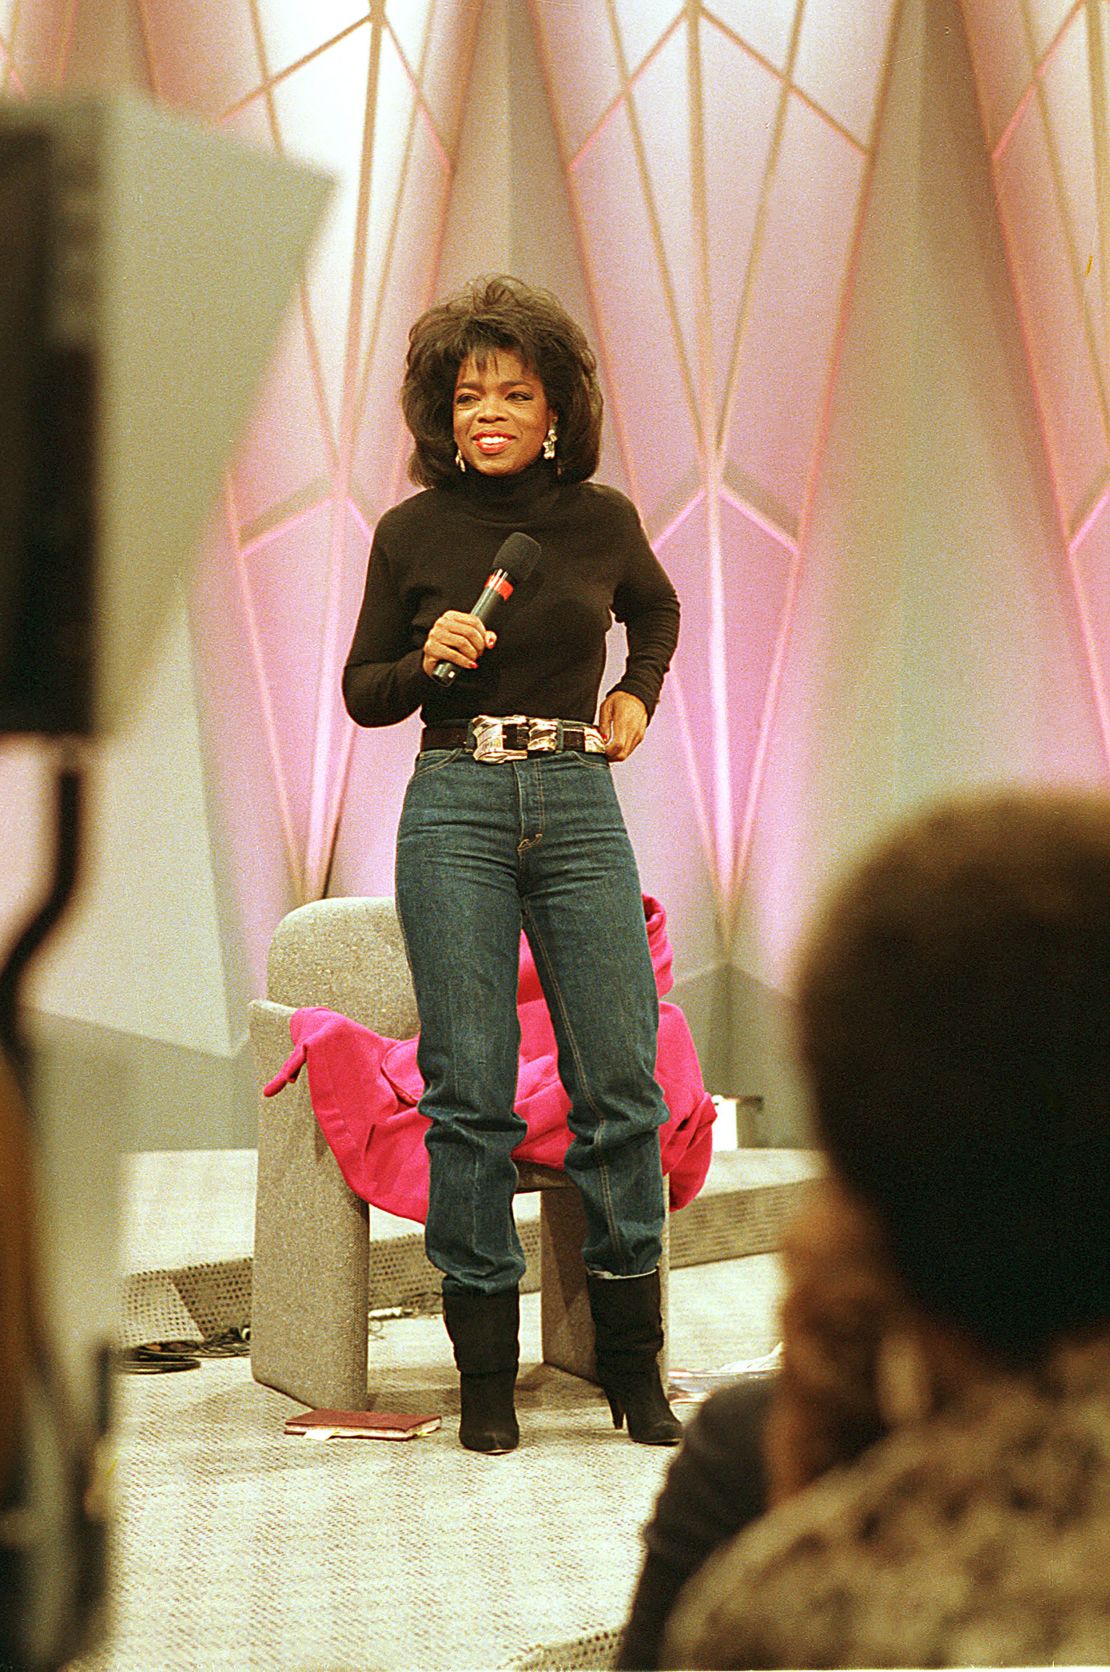 In 1988, Winfrey wheeled out 67 pounds of animal fat in a red wagon to illustrate the weight she lost from a 30-day liquid only diet. She later deeply regretted such a stunt, calling it a “Big, big, big, big, big, big, big mistake!”